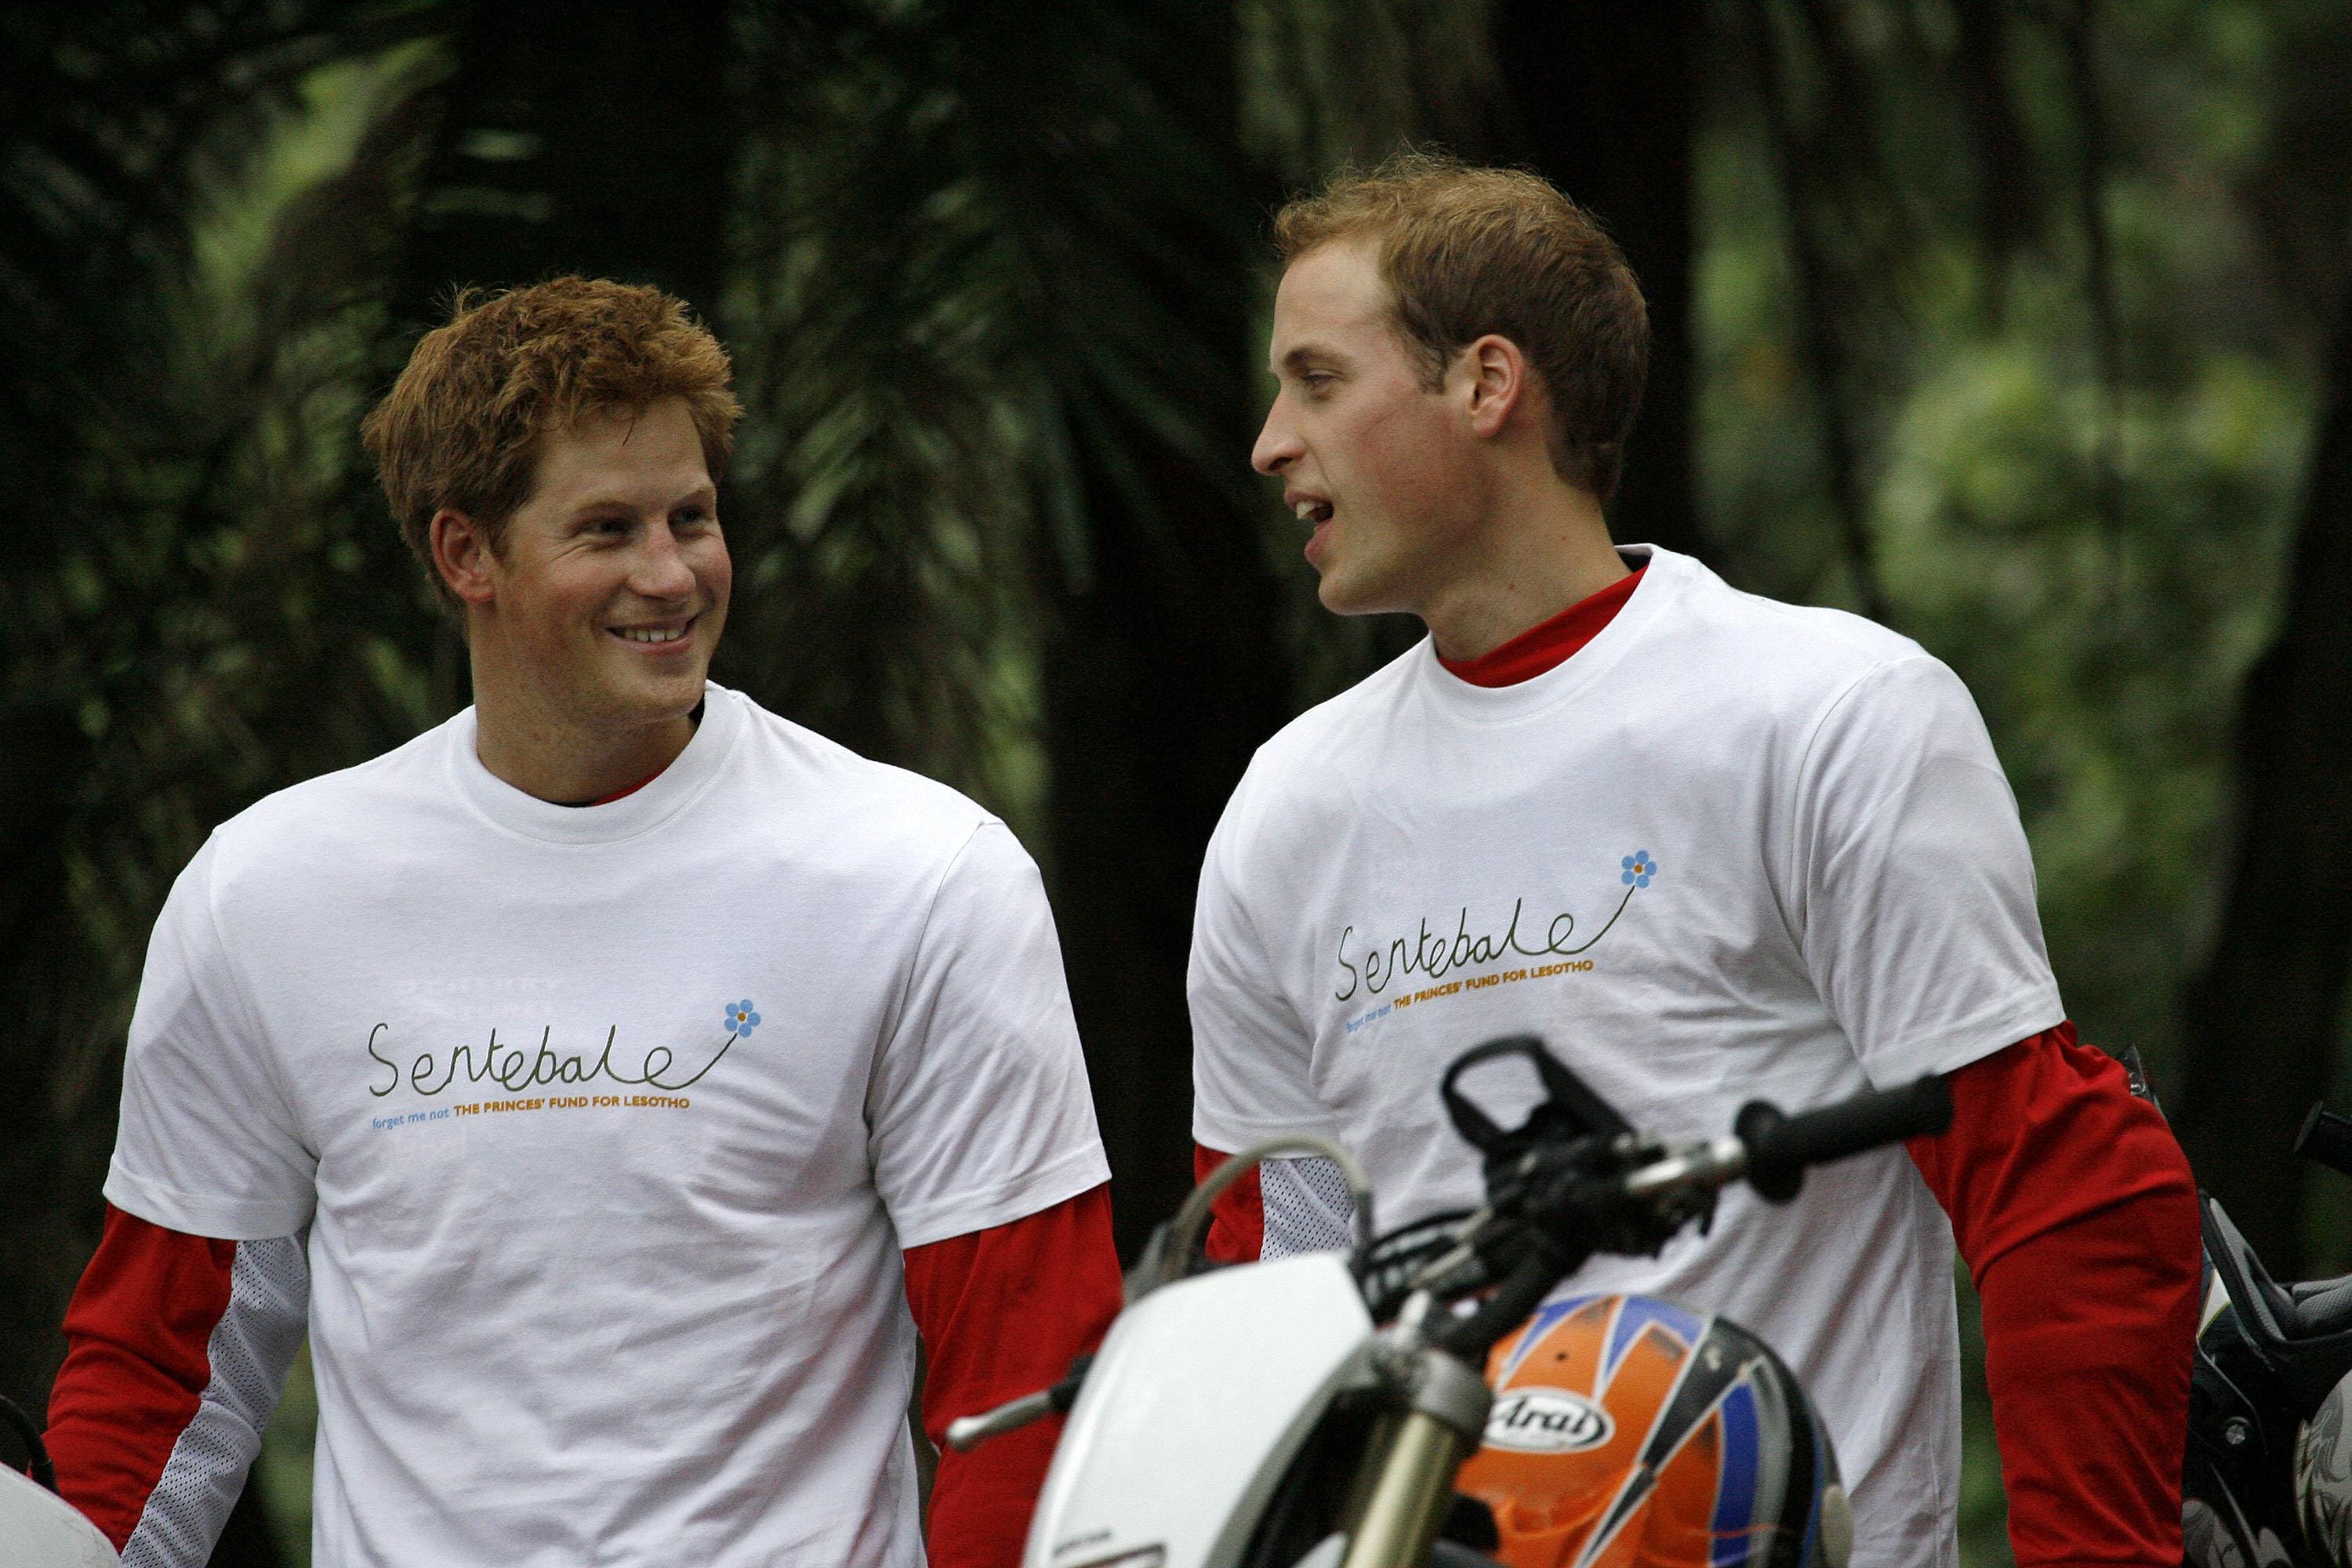 Prince William and Prince Harry ahead of the Enduro Africa charity ride in Port Edward, South Africa